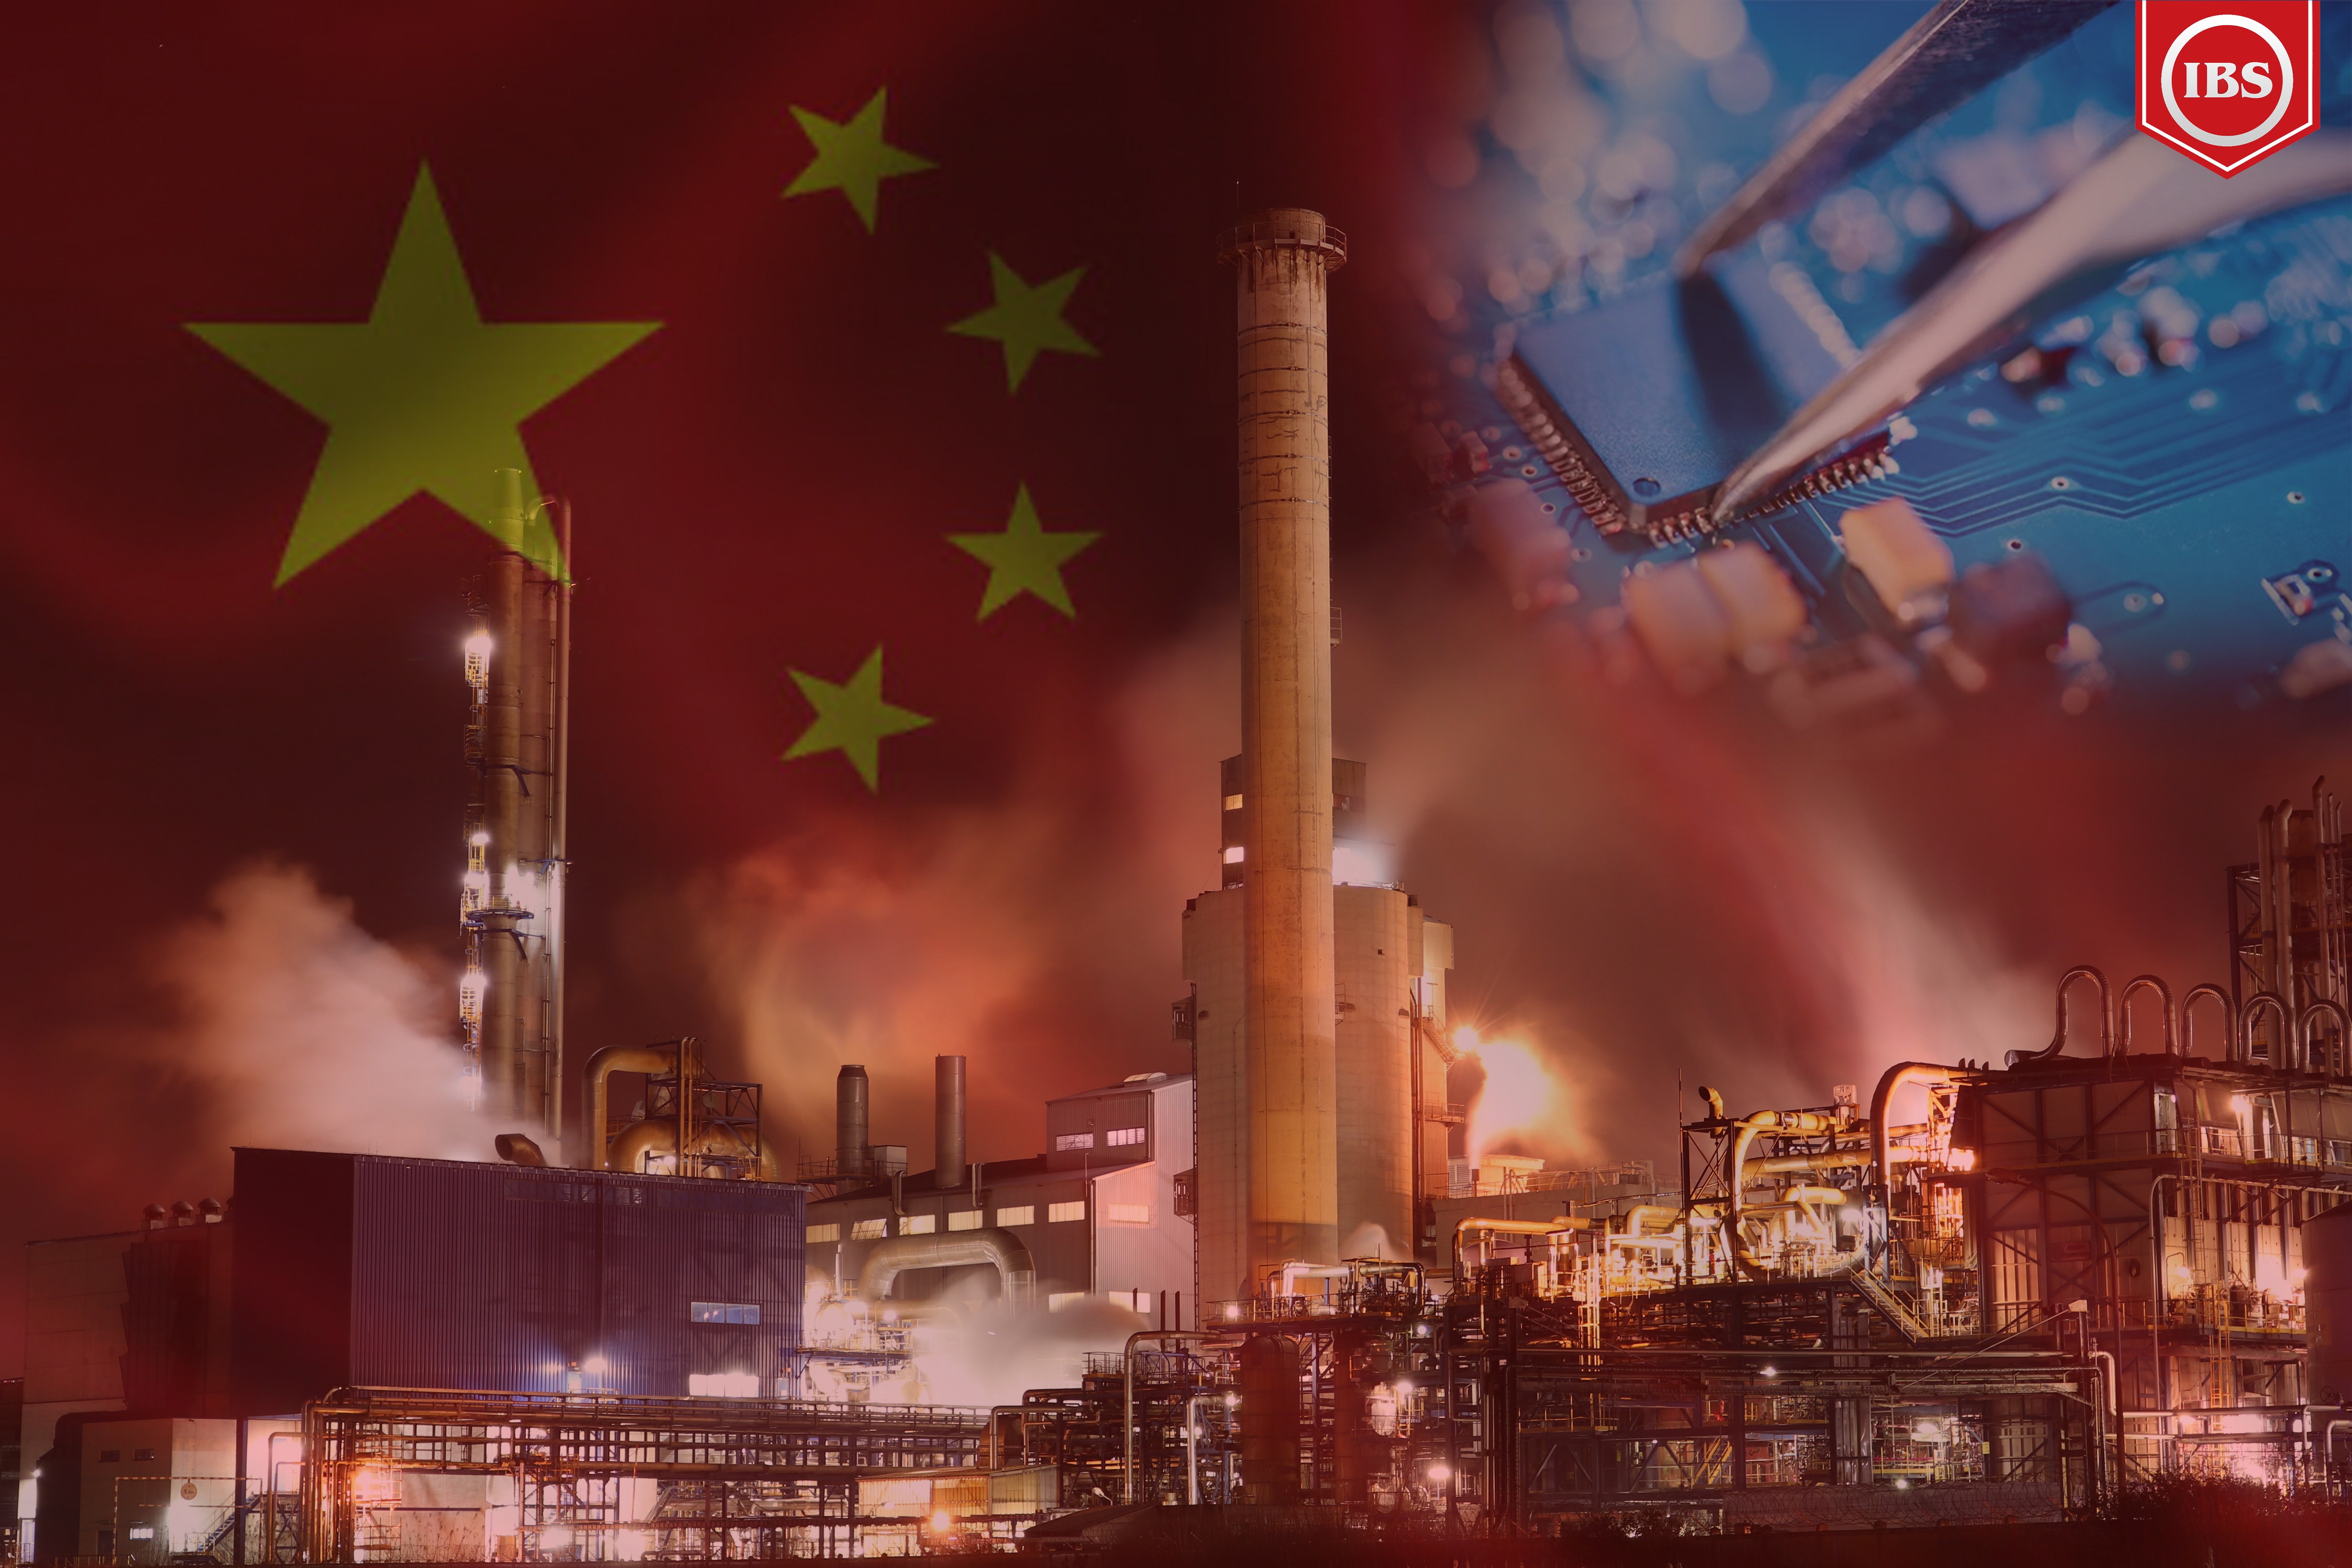 Composite image of the Chinese flag, a factory, and a board.